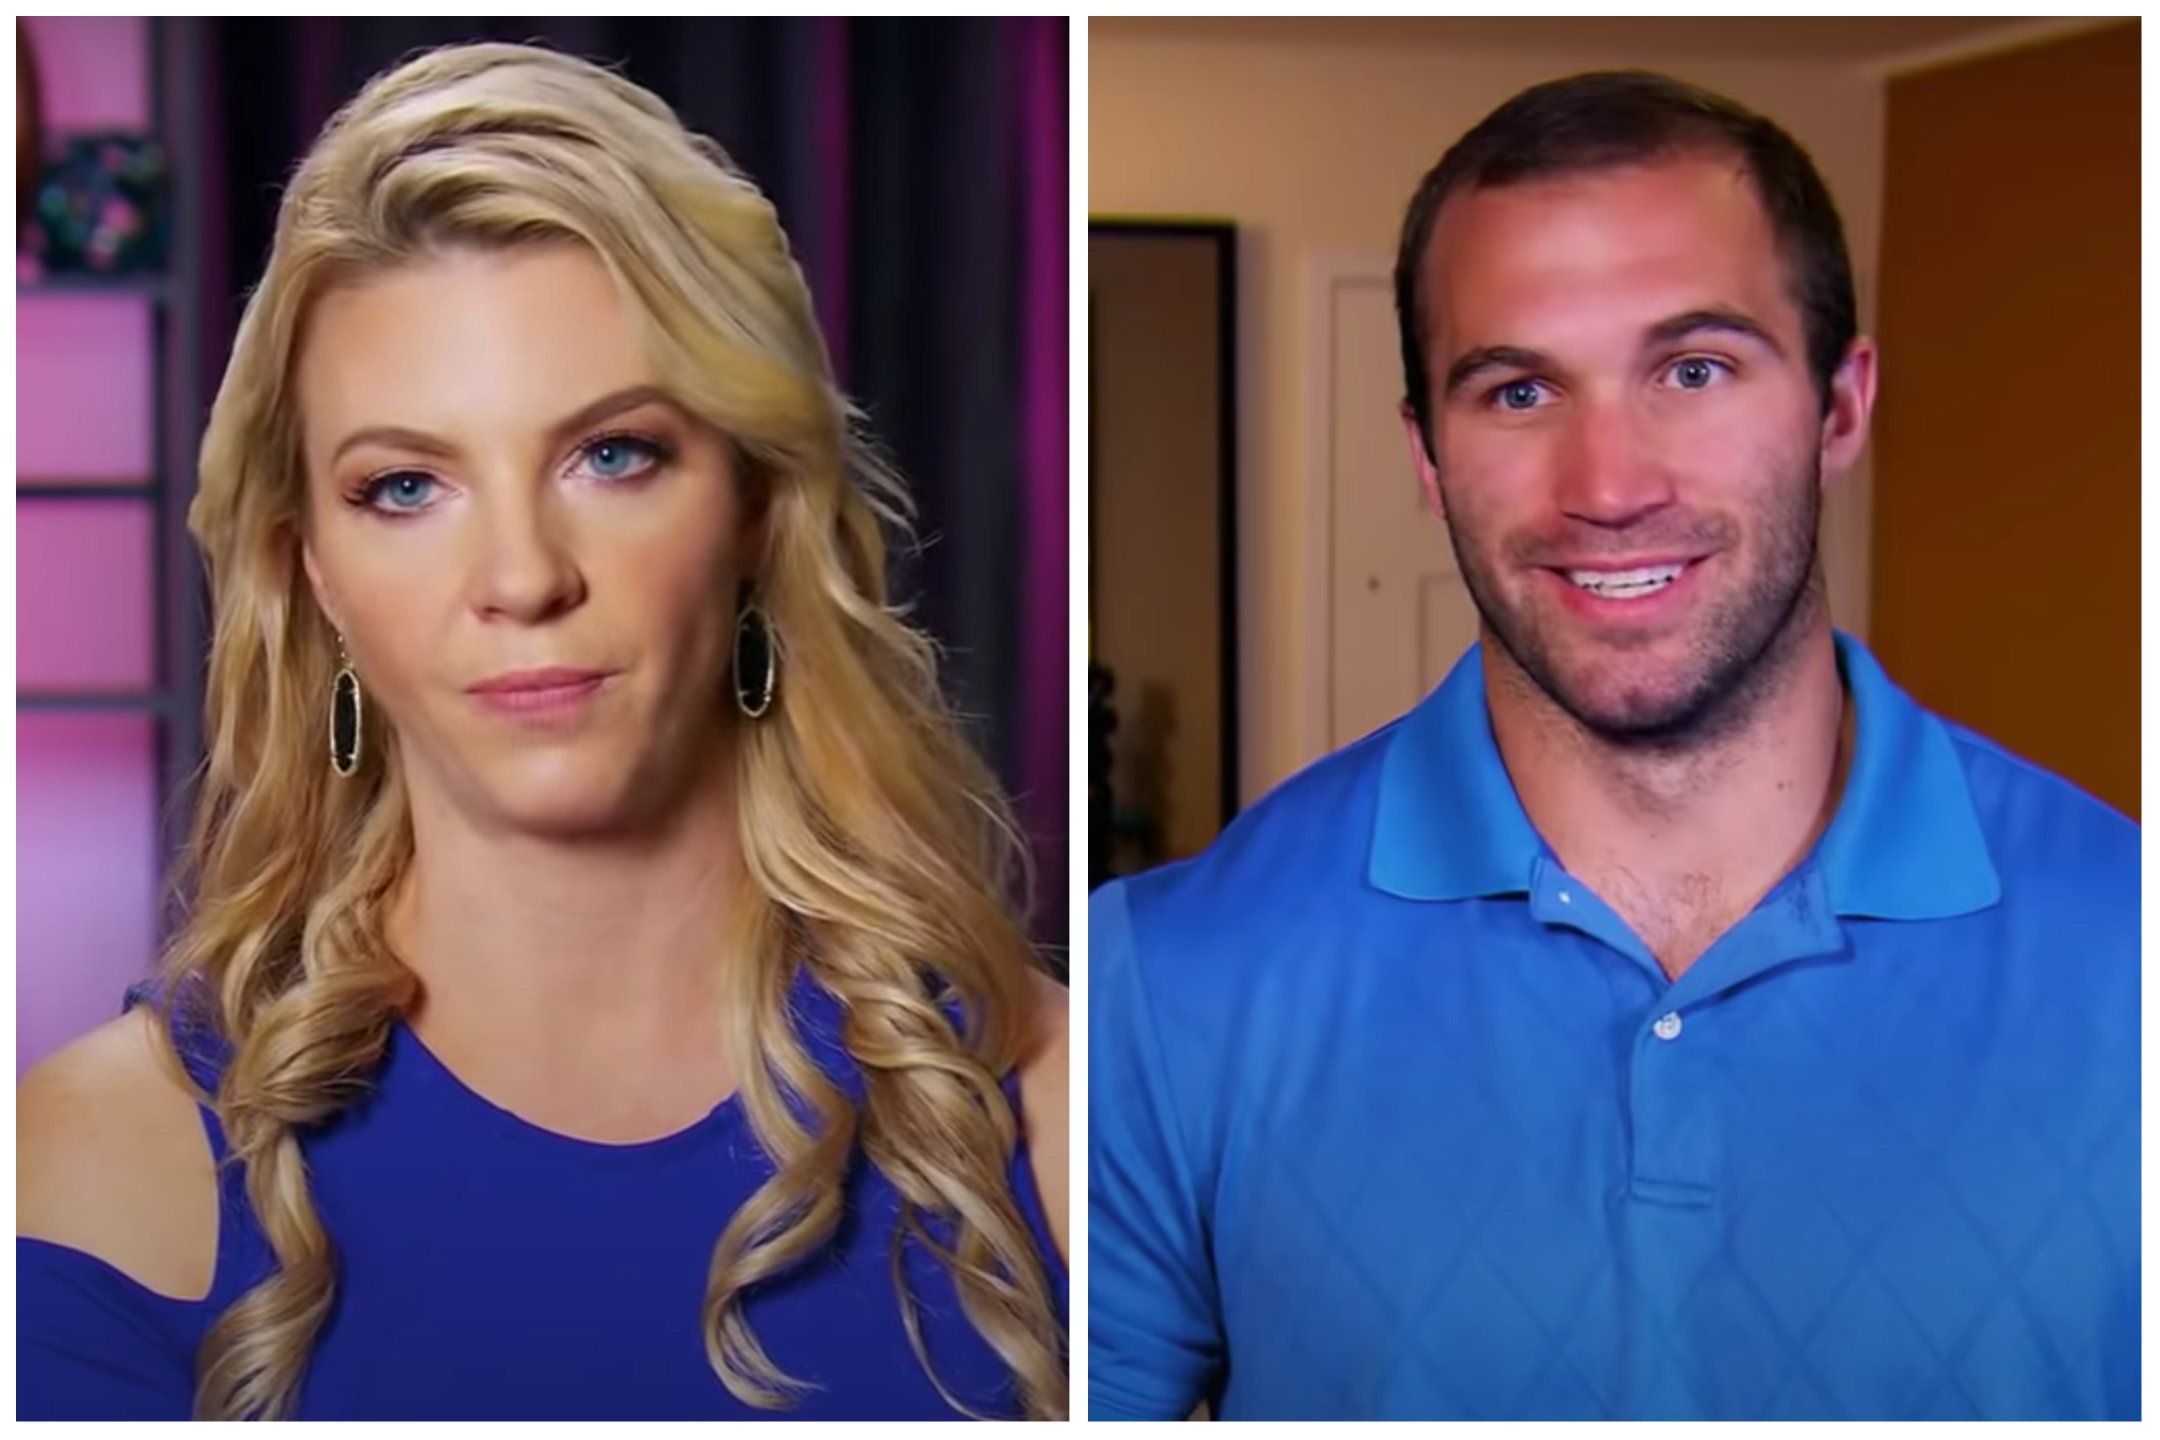 Side by side images of Dr. Jessica Griffin and Jon Francetic from 'Married at First Sight'